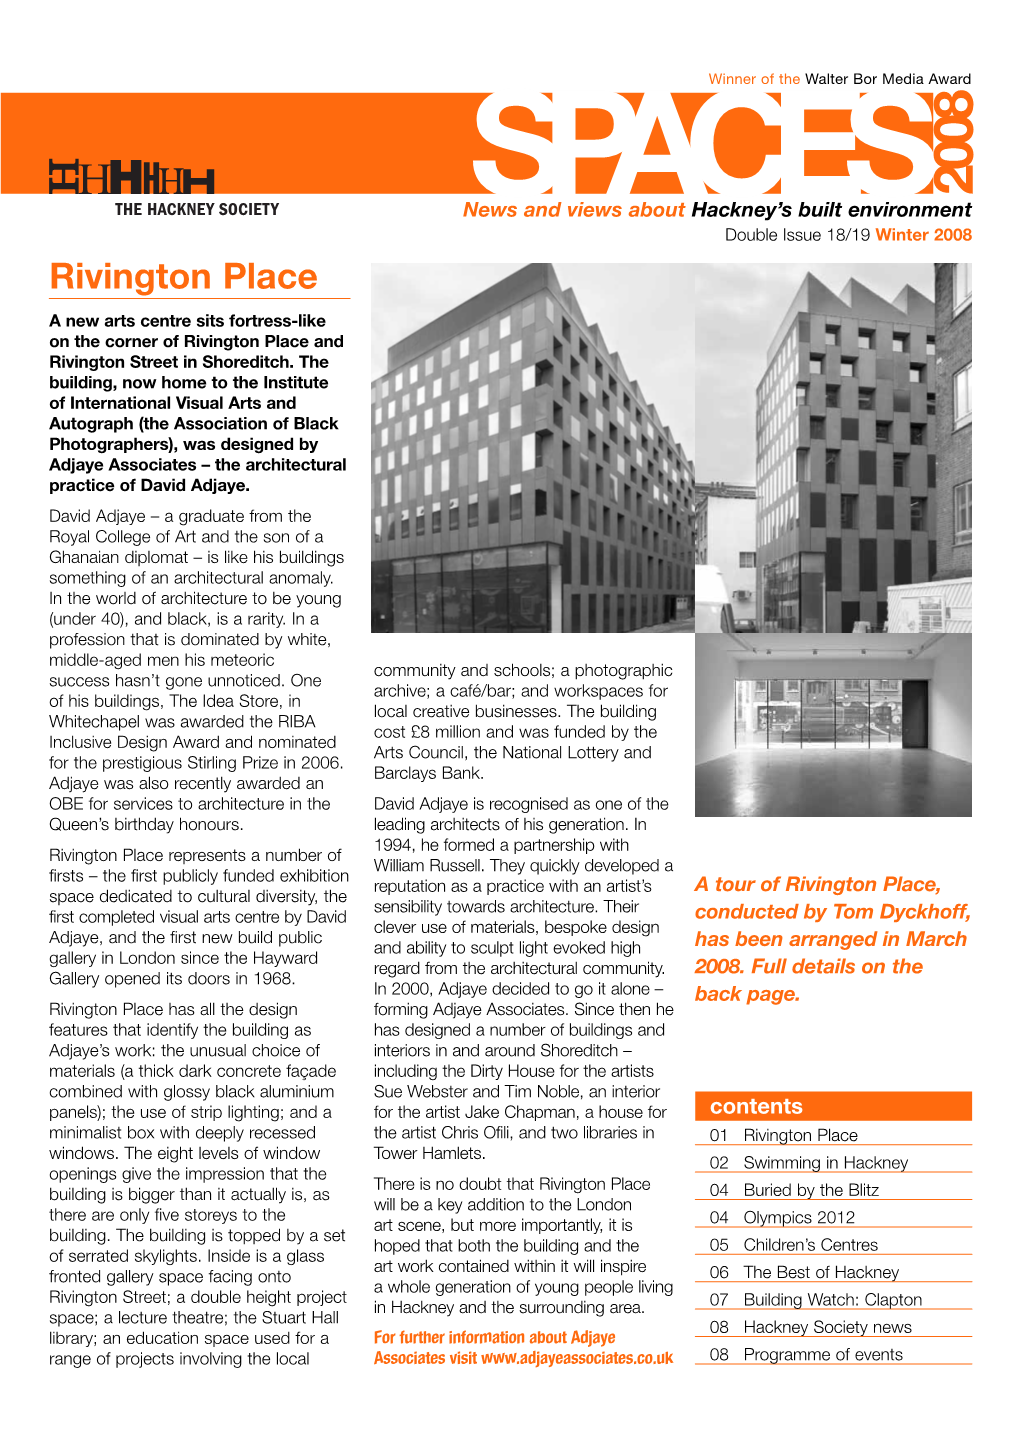 Rivington Place a New Arts Centre Sits Fortress-Like on the Corner of Rivington Place and Rivington Street in Shoreditch